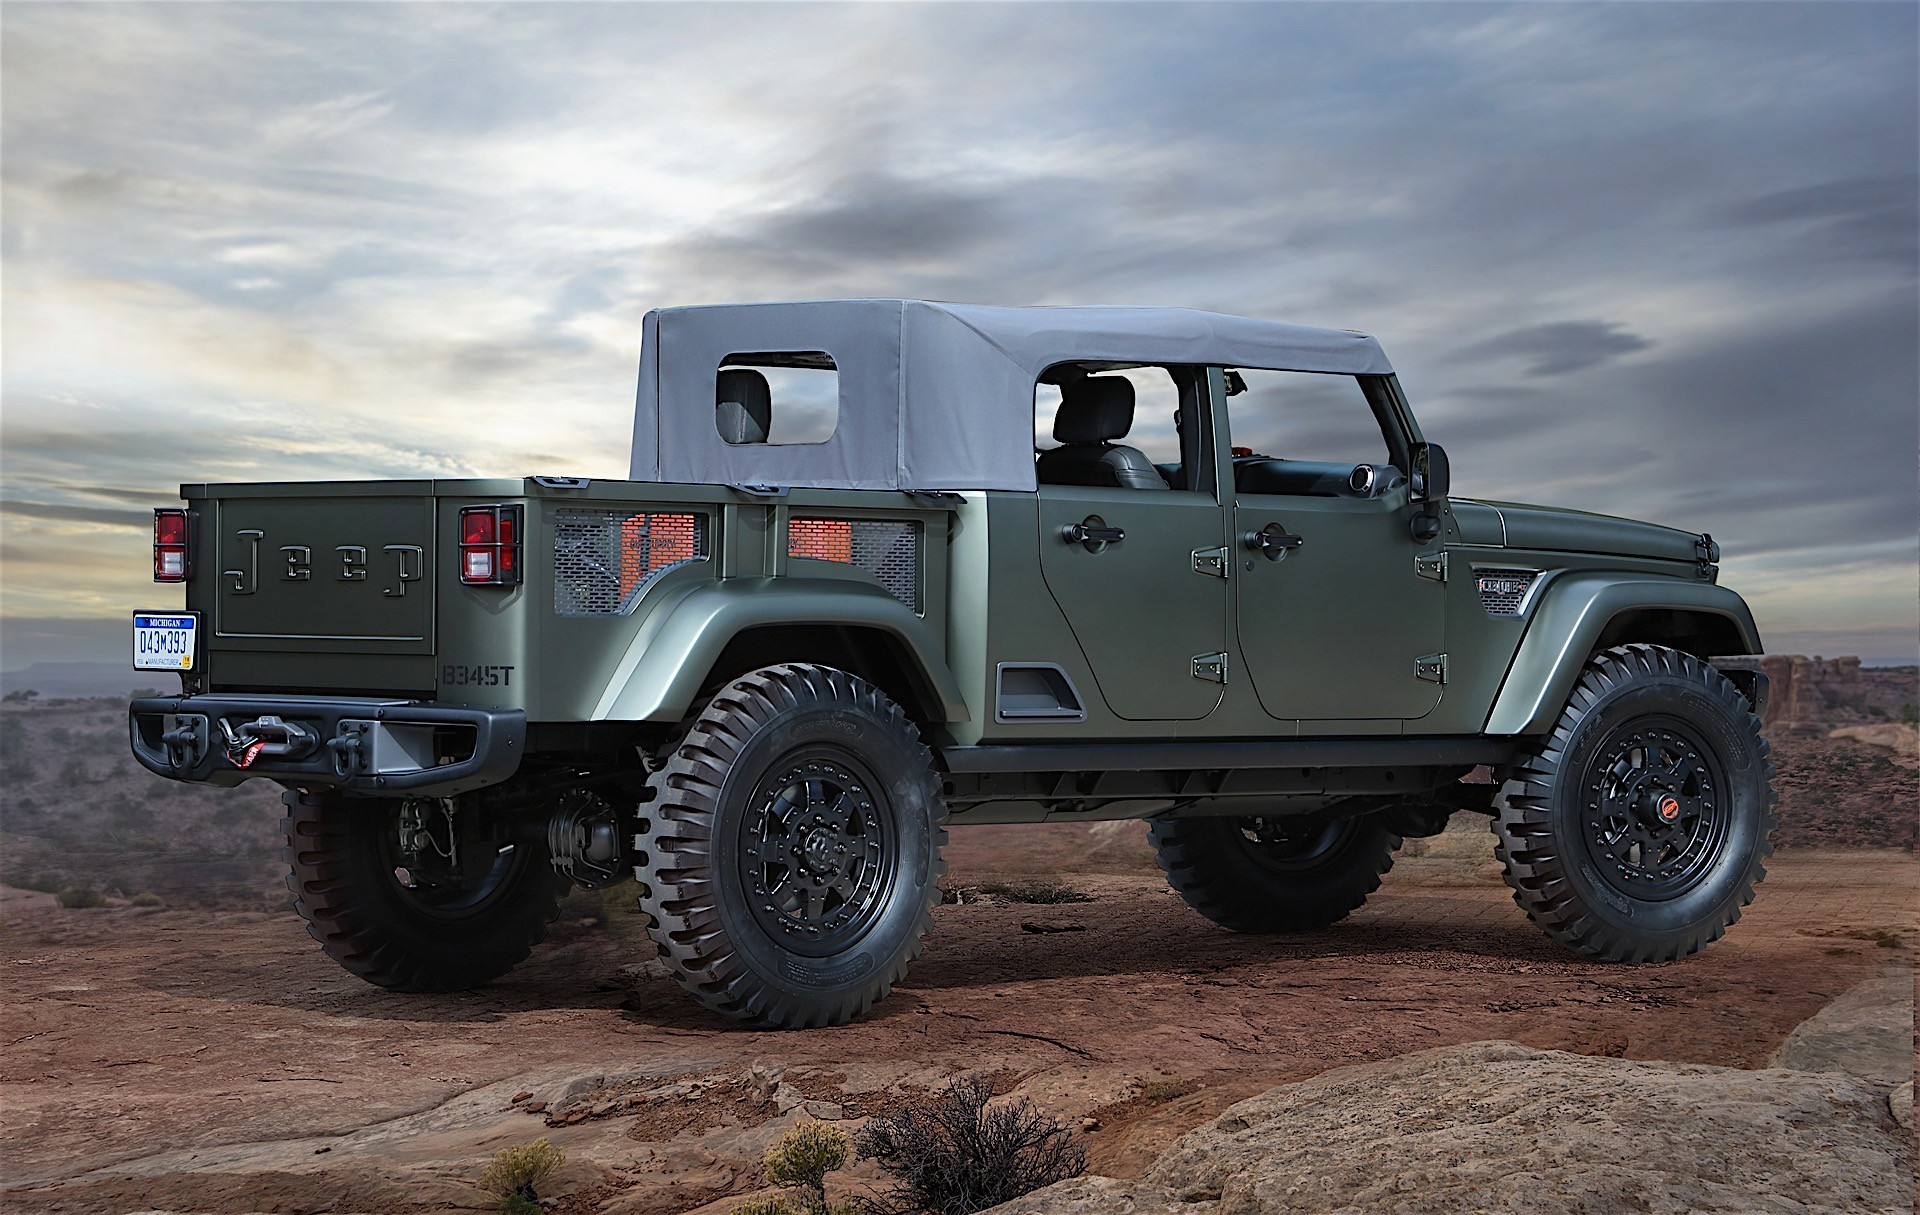 2018 Jeep Wrangler Confirmed to Spawn Crew Cab Pickup Truck - autoevolution